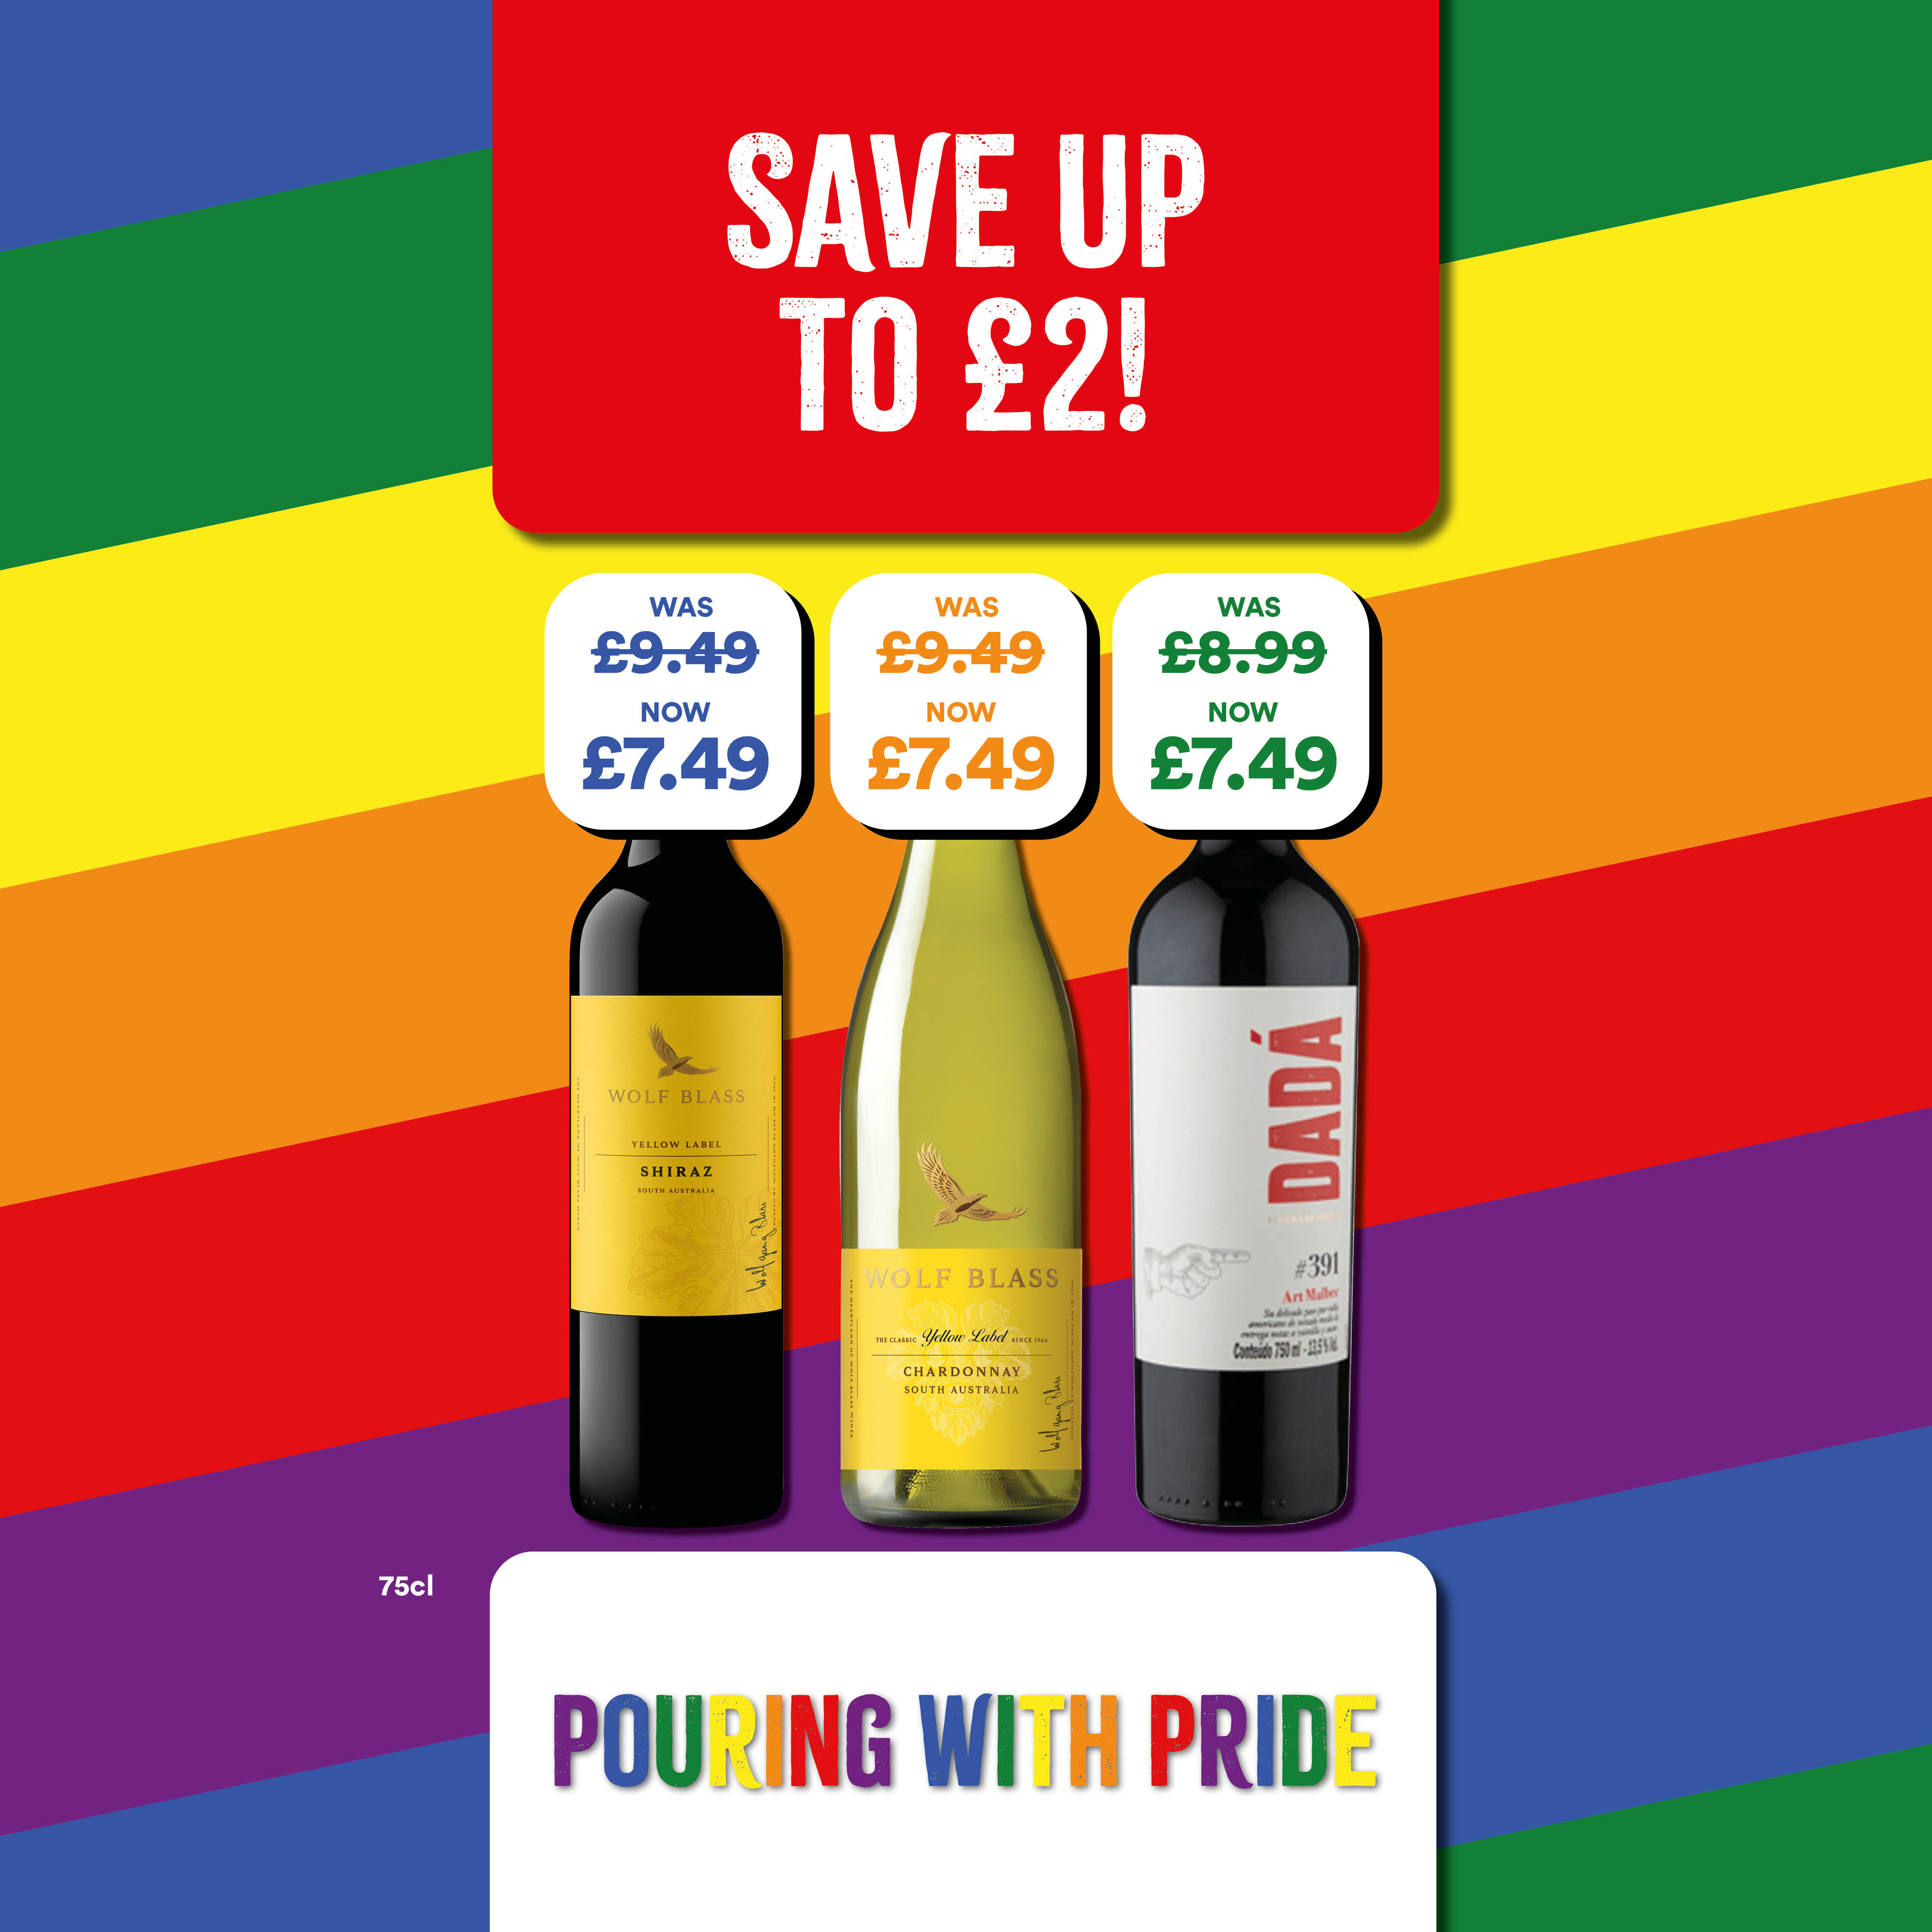 Save up to £2 on wold Class and Dada Wine. Bargain Booze Plus Horley 01293 820180